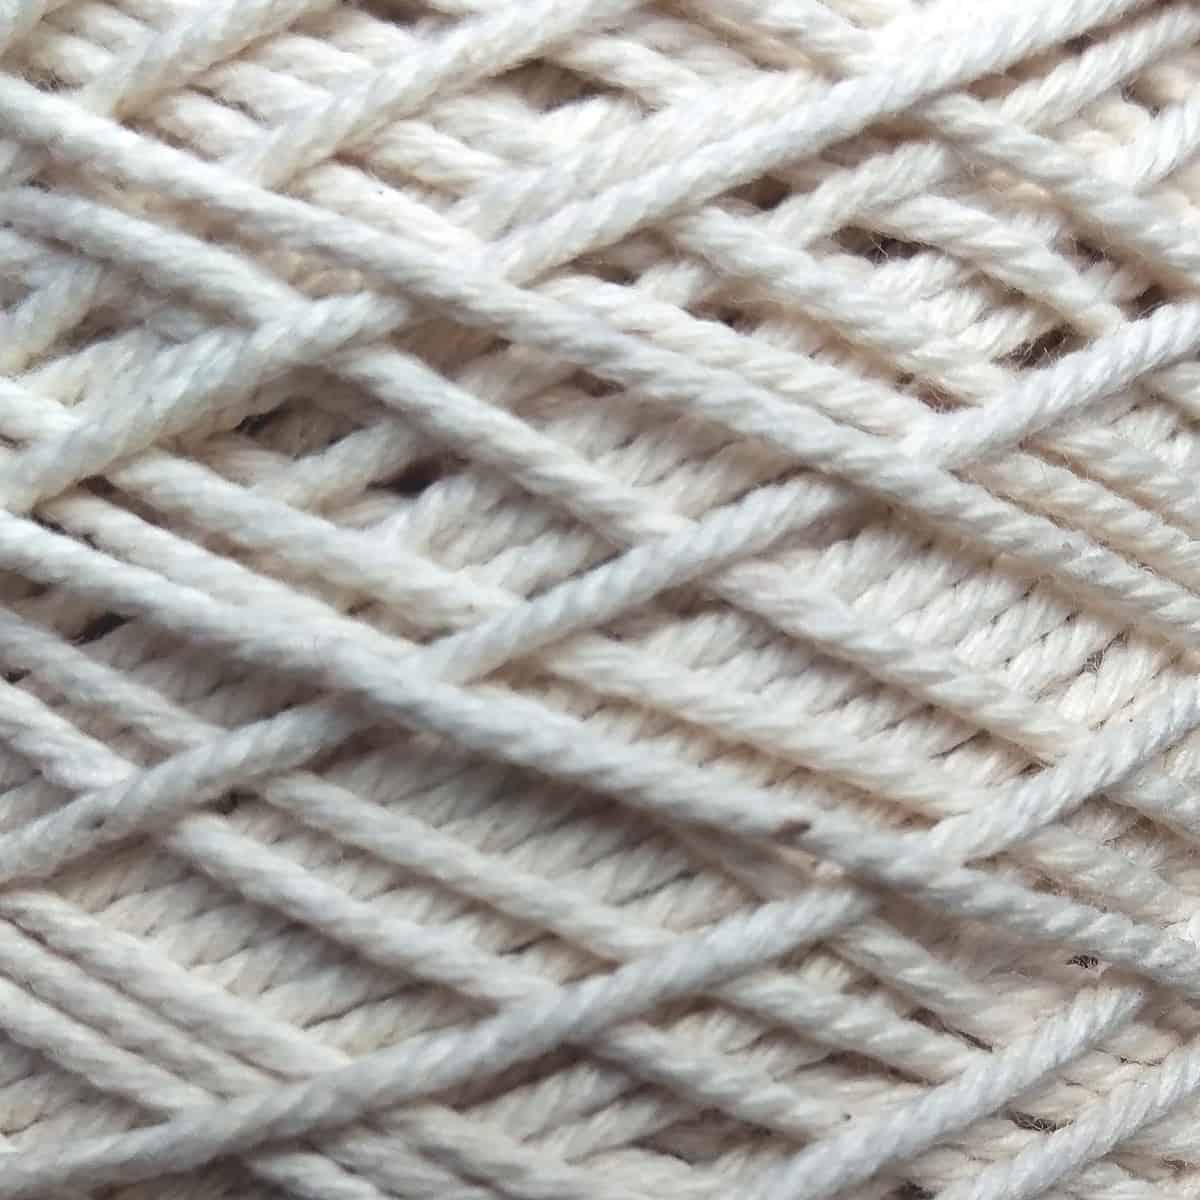 A spool of our Cotton Rope Cord.